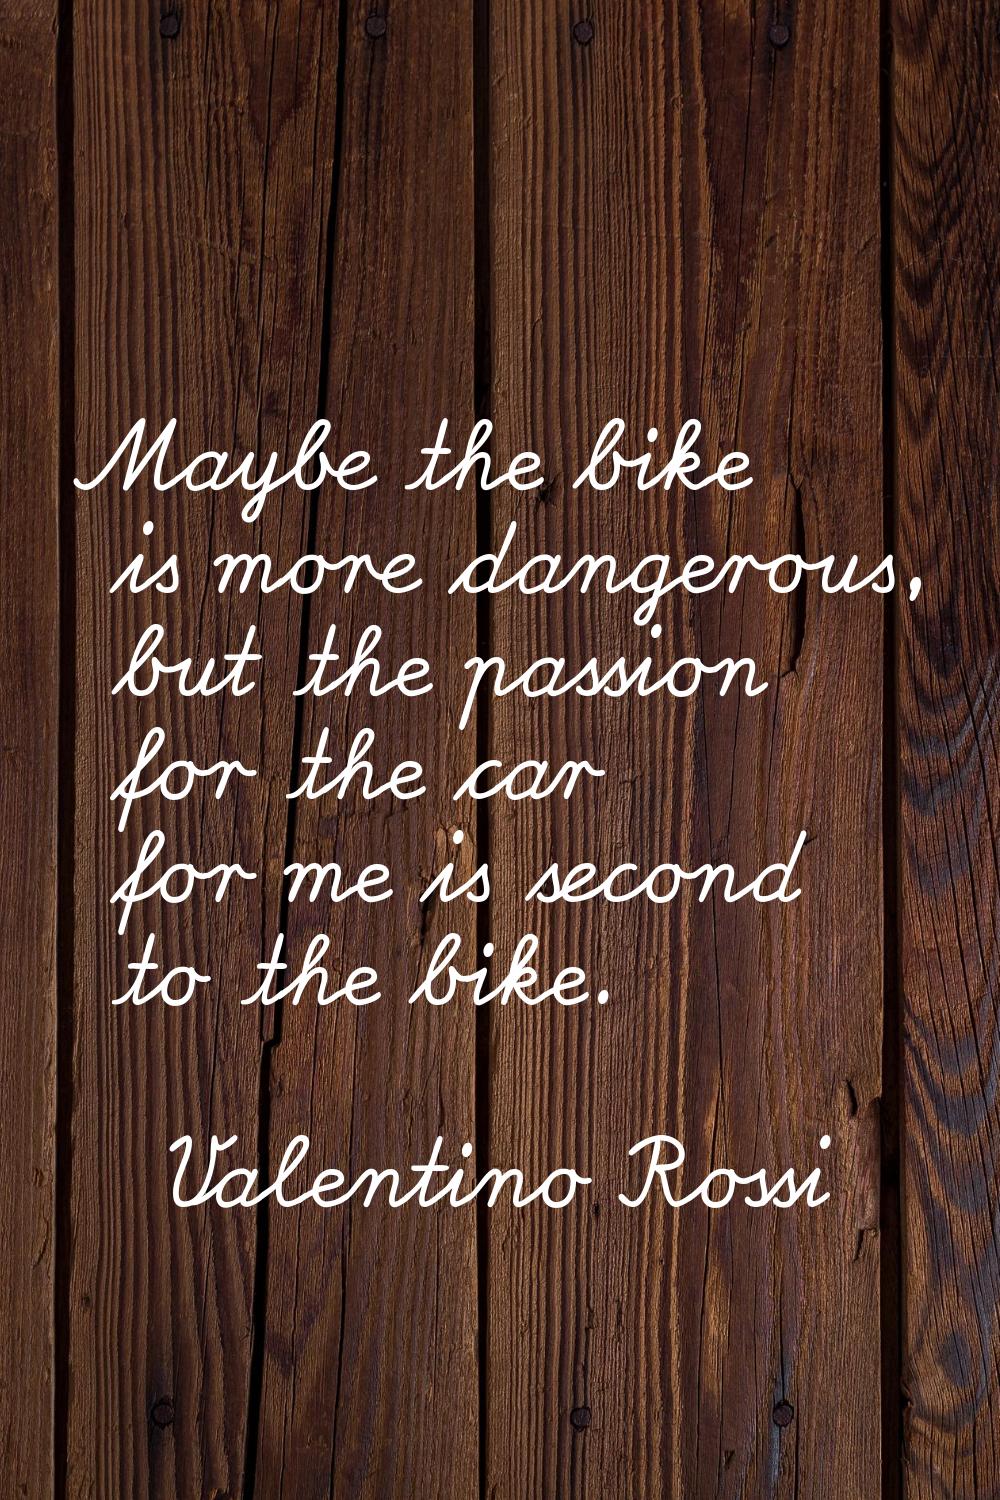 Maybe the bike is more dangerous, but the passion for the car for me is second to the bike.